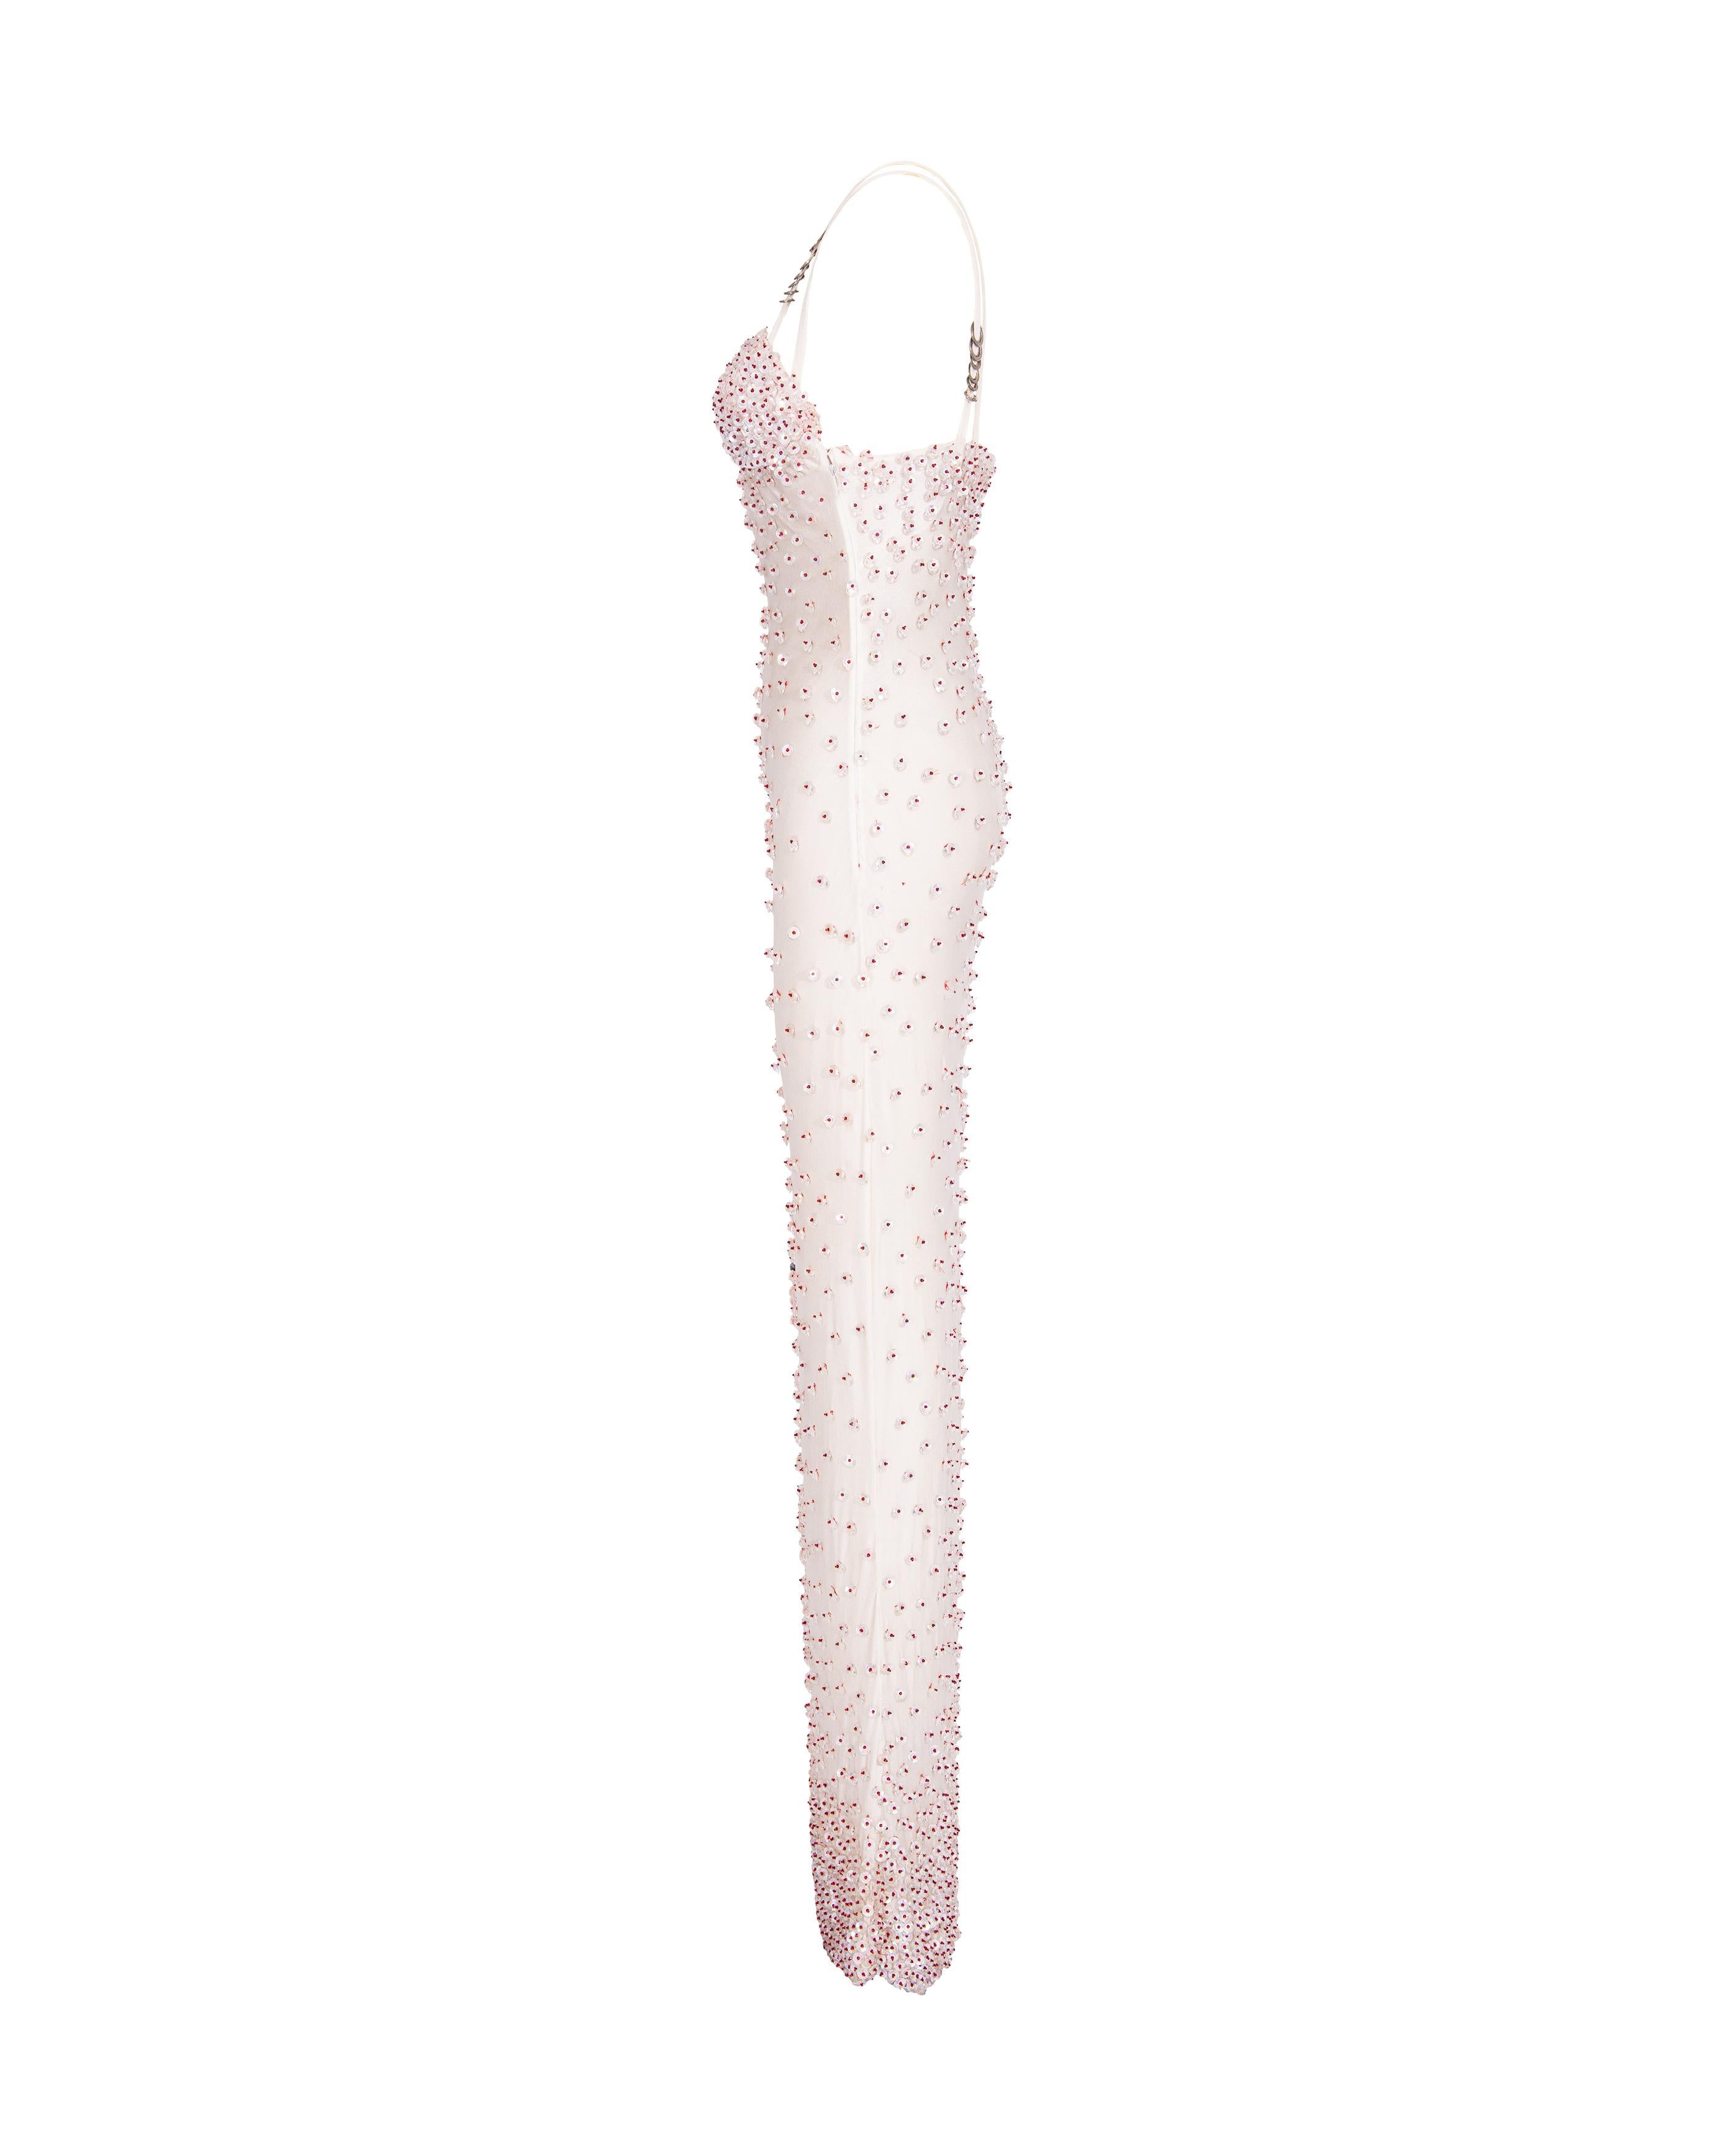 Women's S/S 1995 Gianni Versace Soft White Embellished Gown